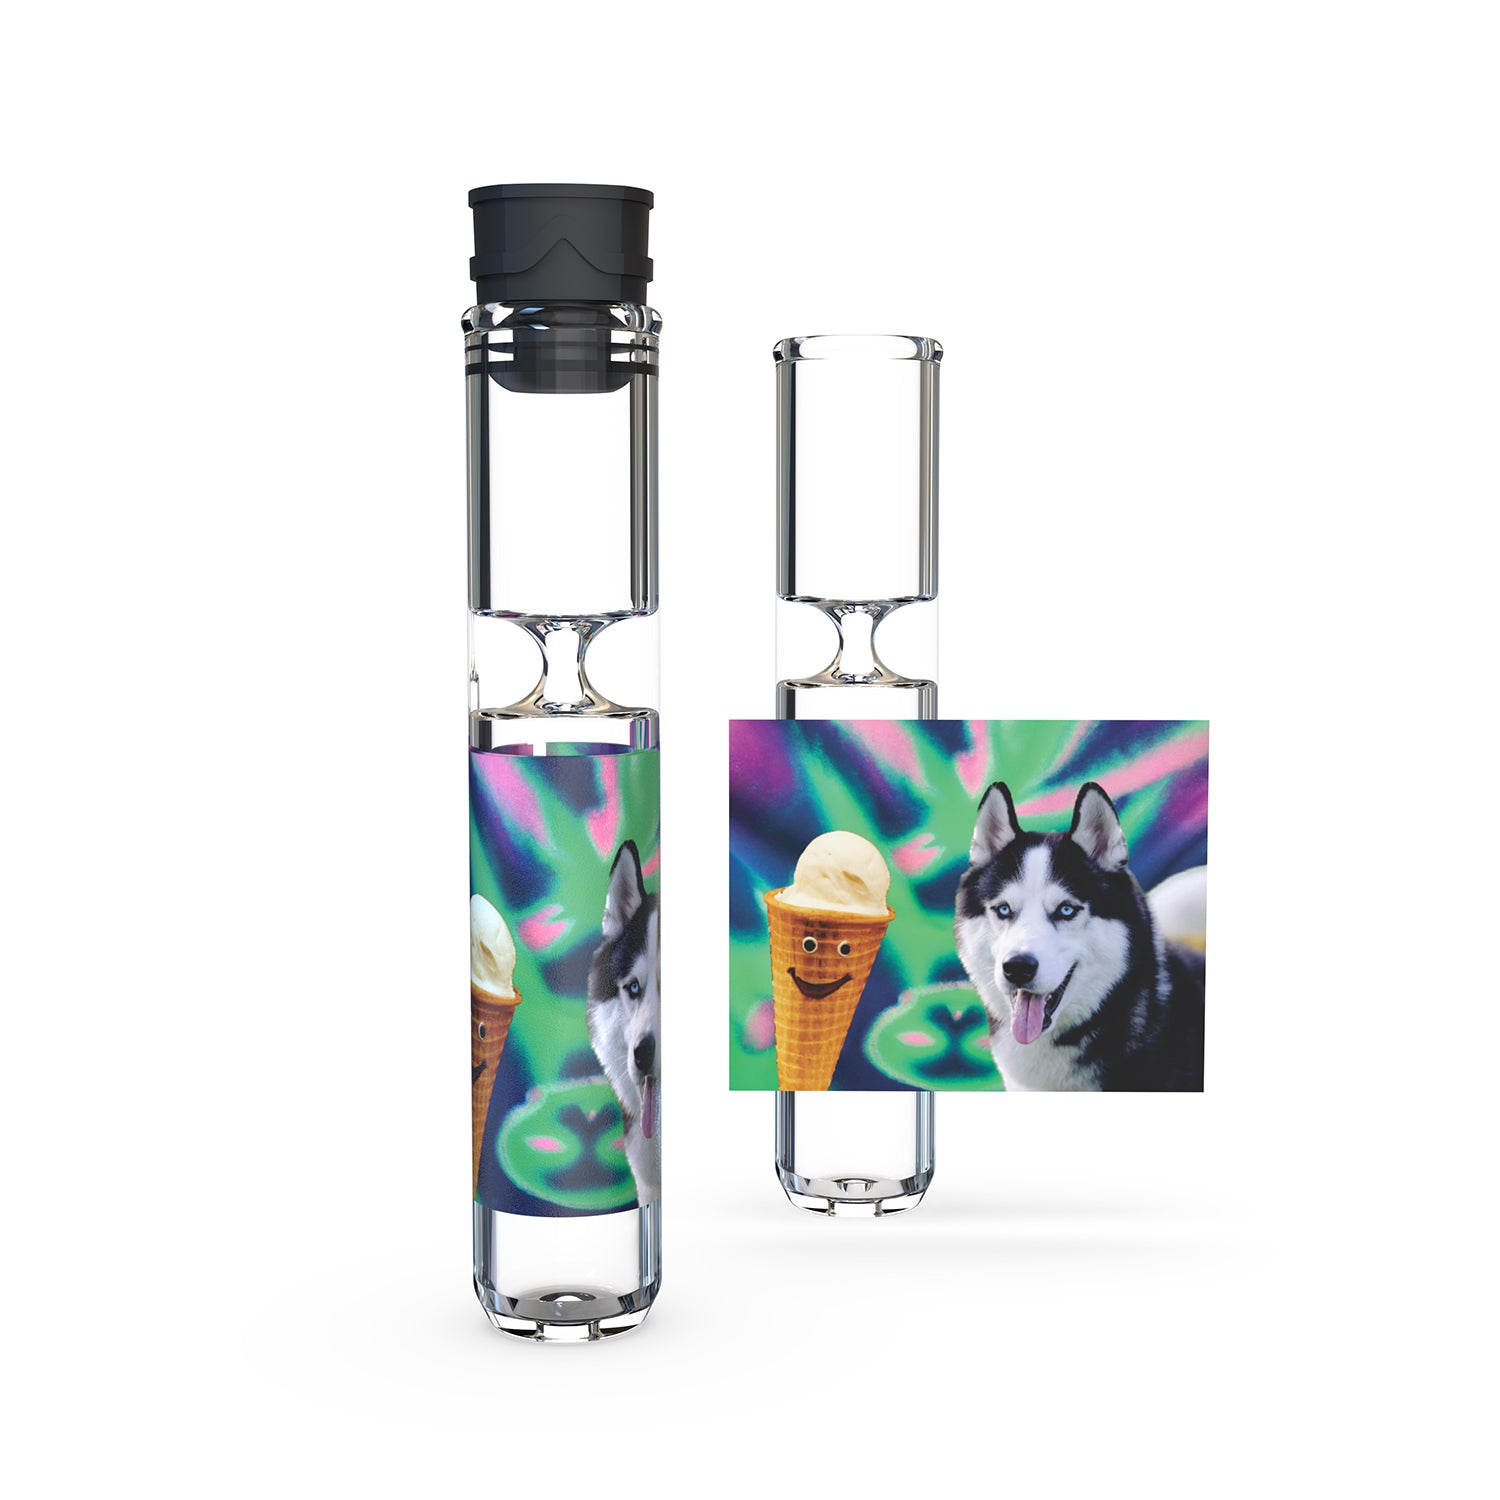 One hitter with cap for dog lovers.